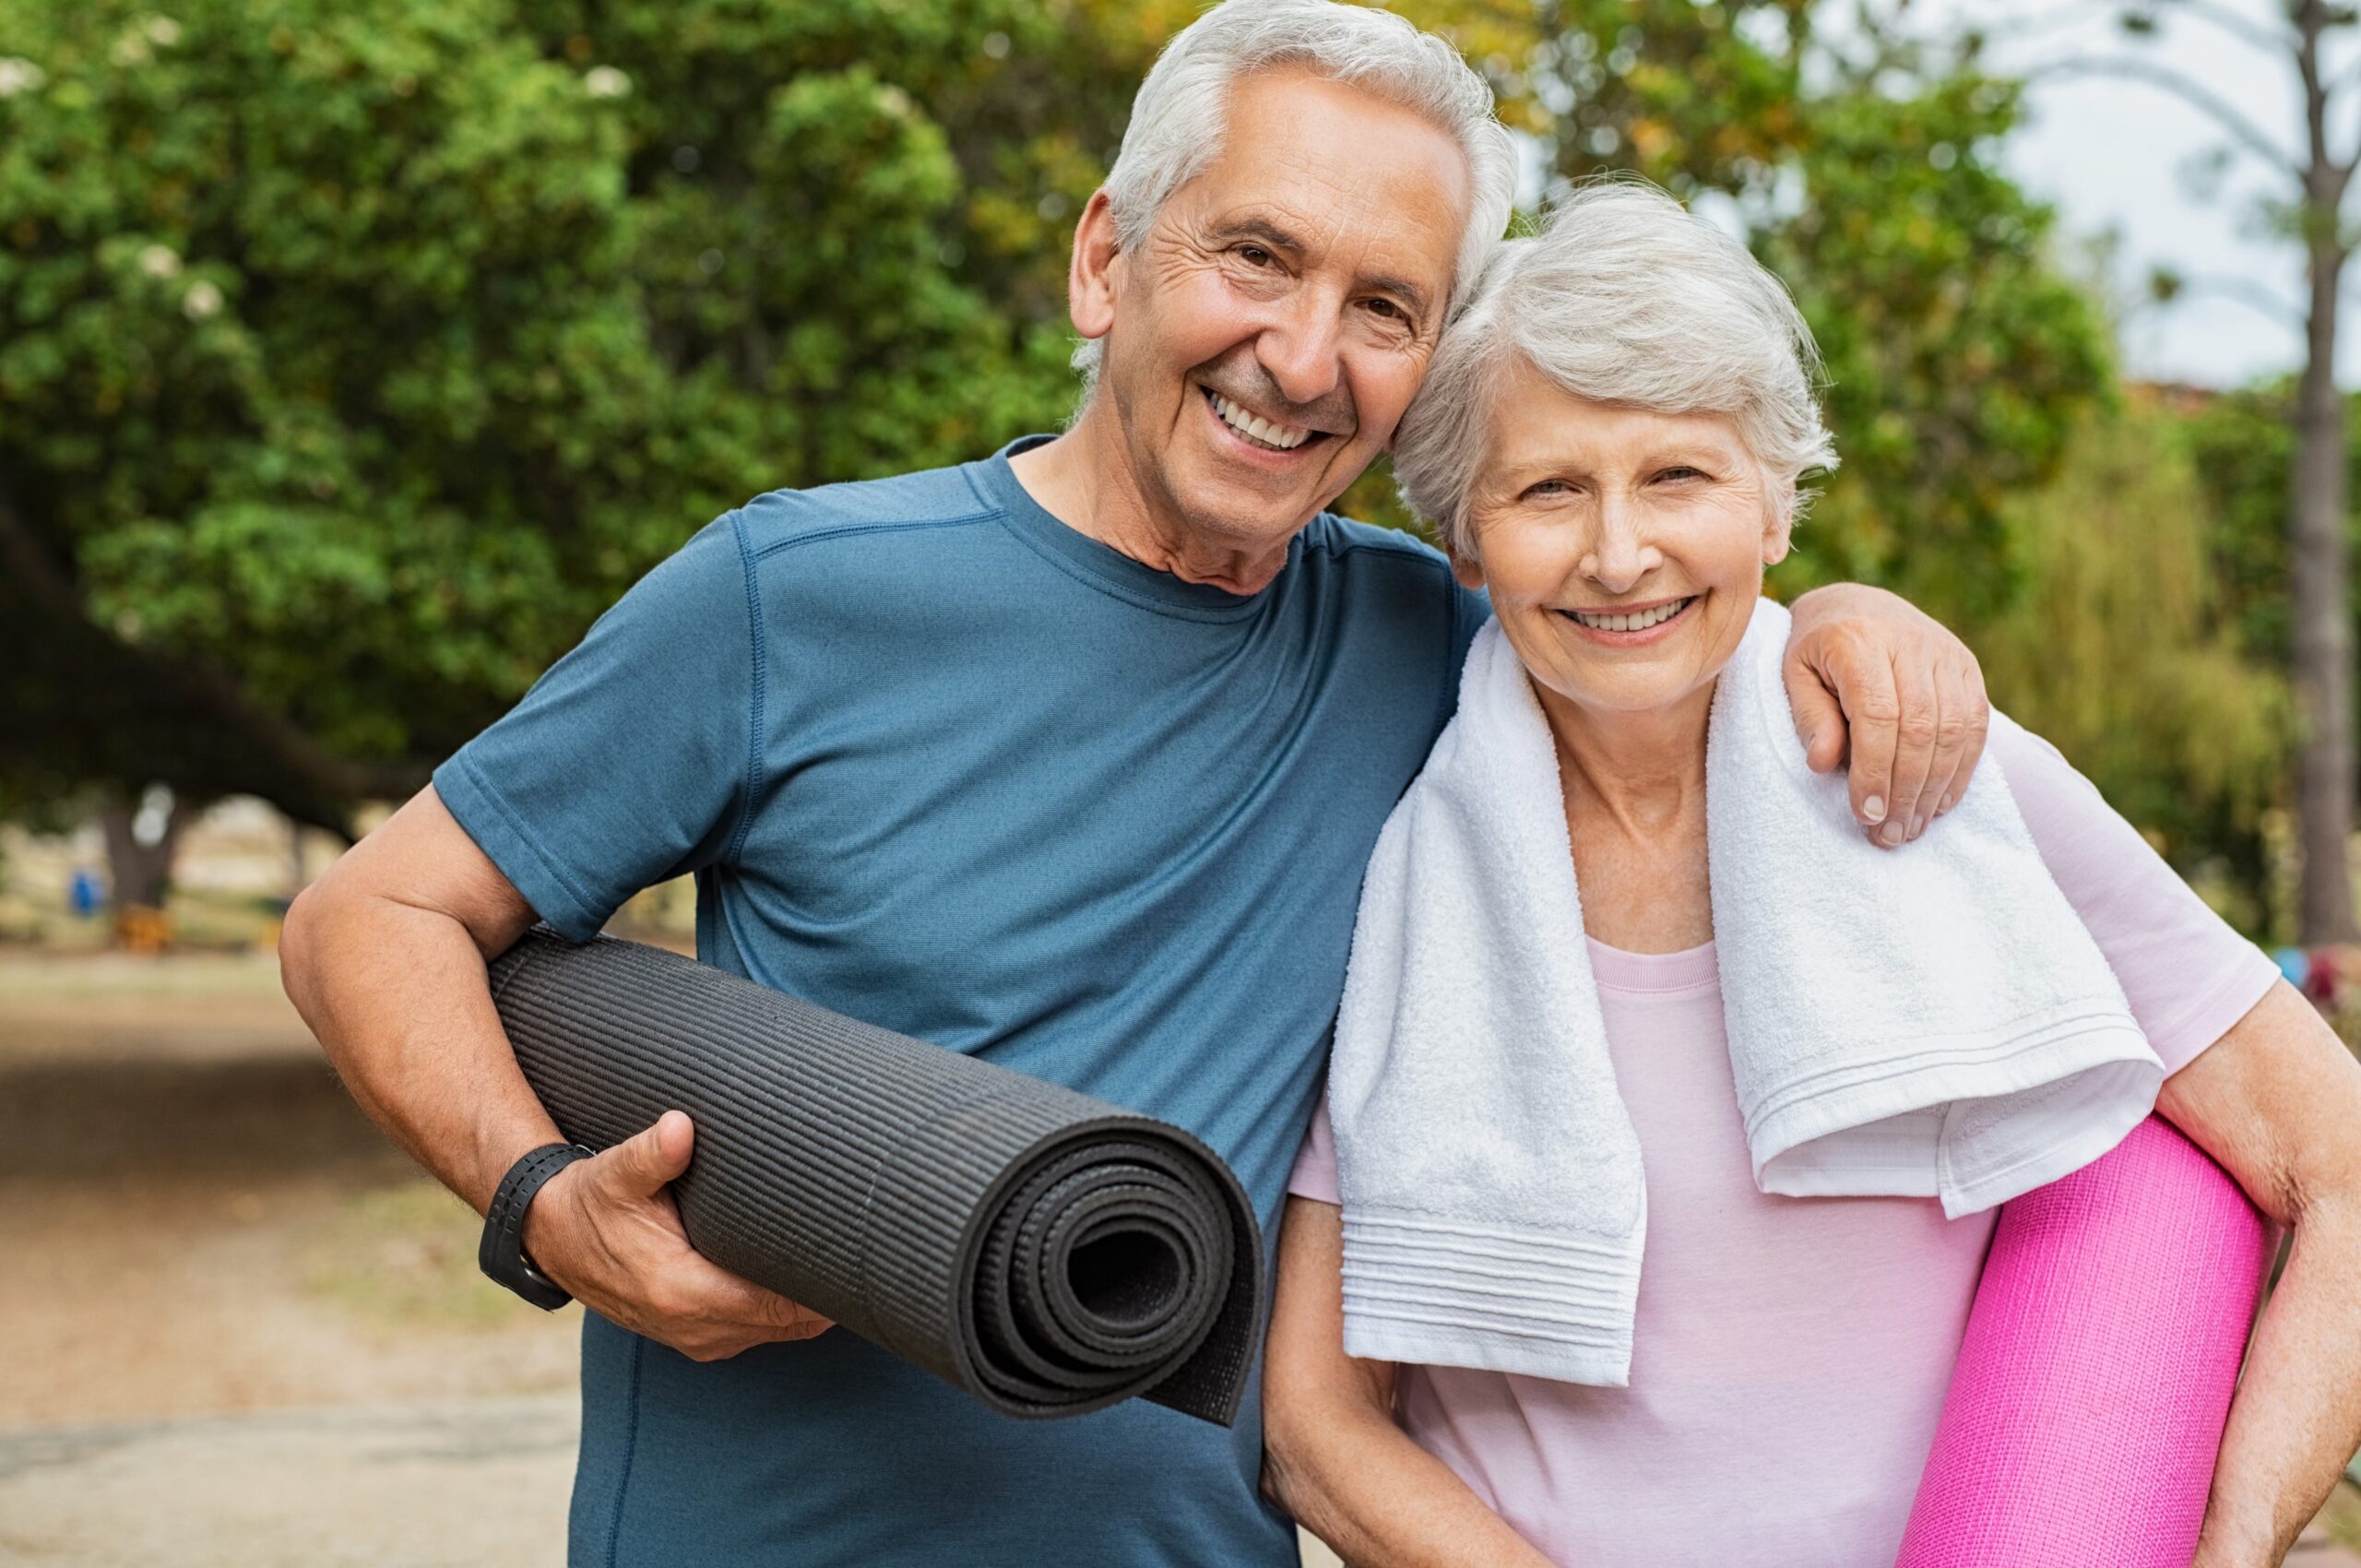 Sarcopenia: Age-Related Loss Of Muscle Mass, Strength, & Function